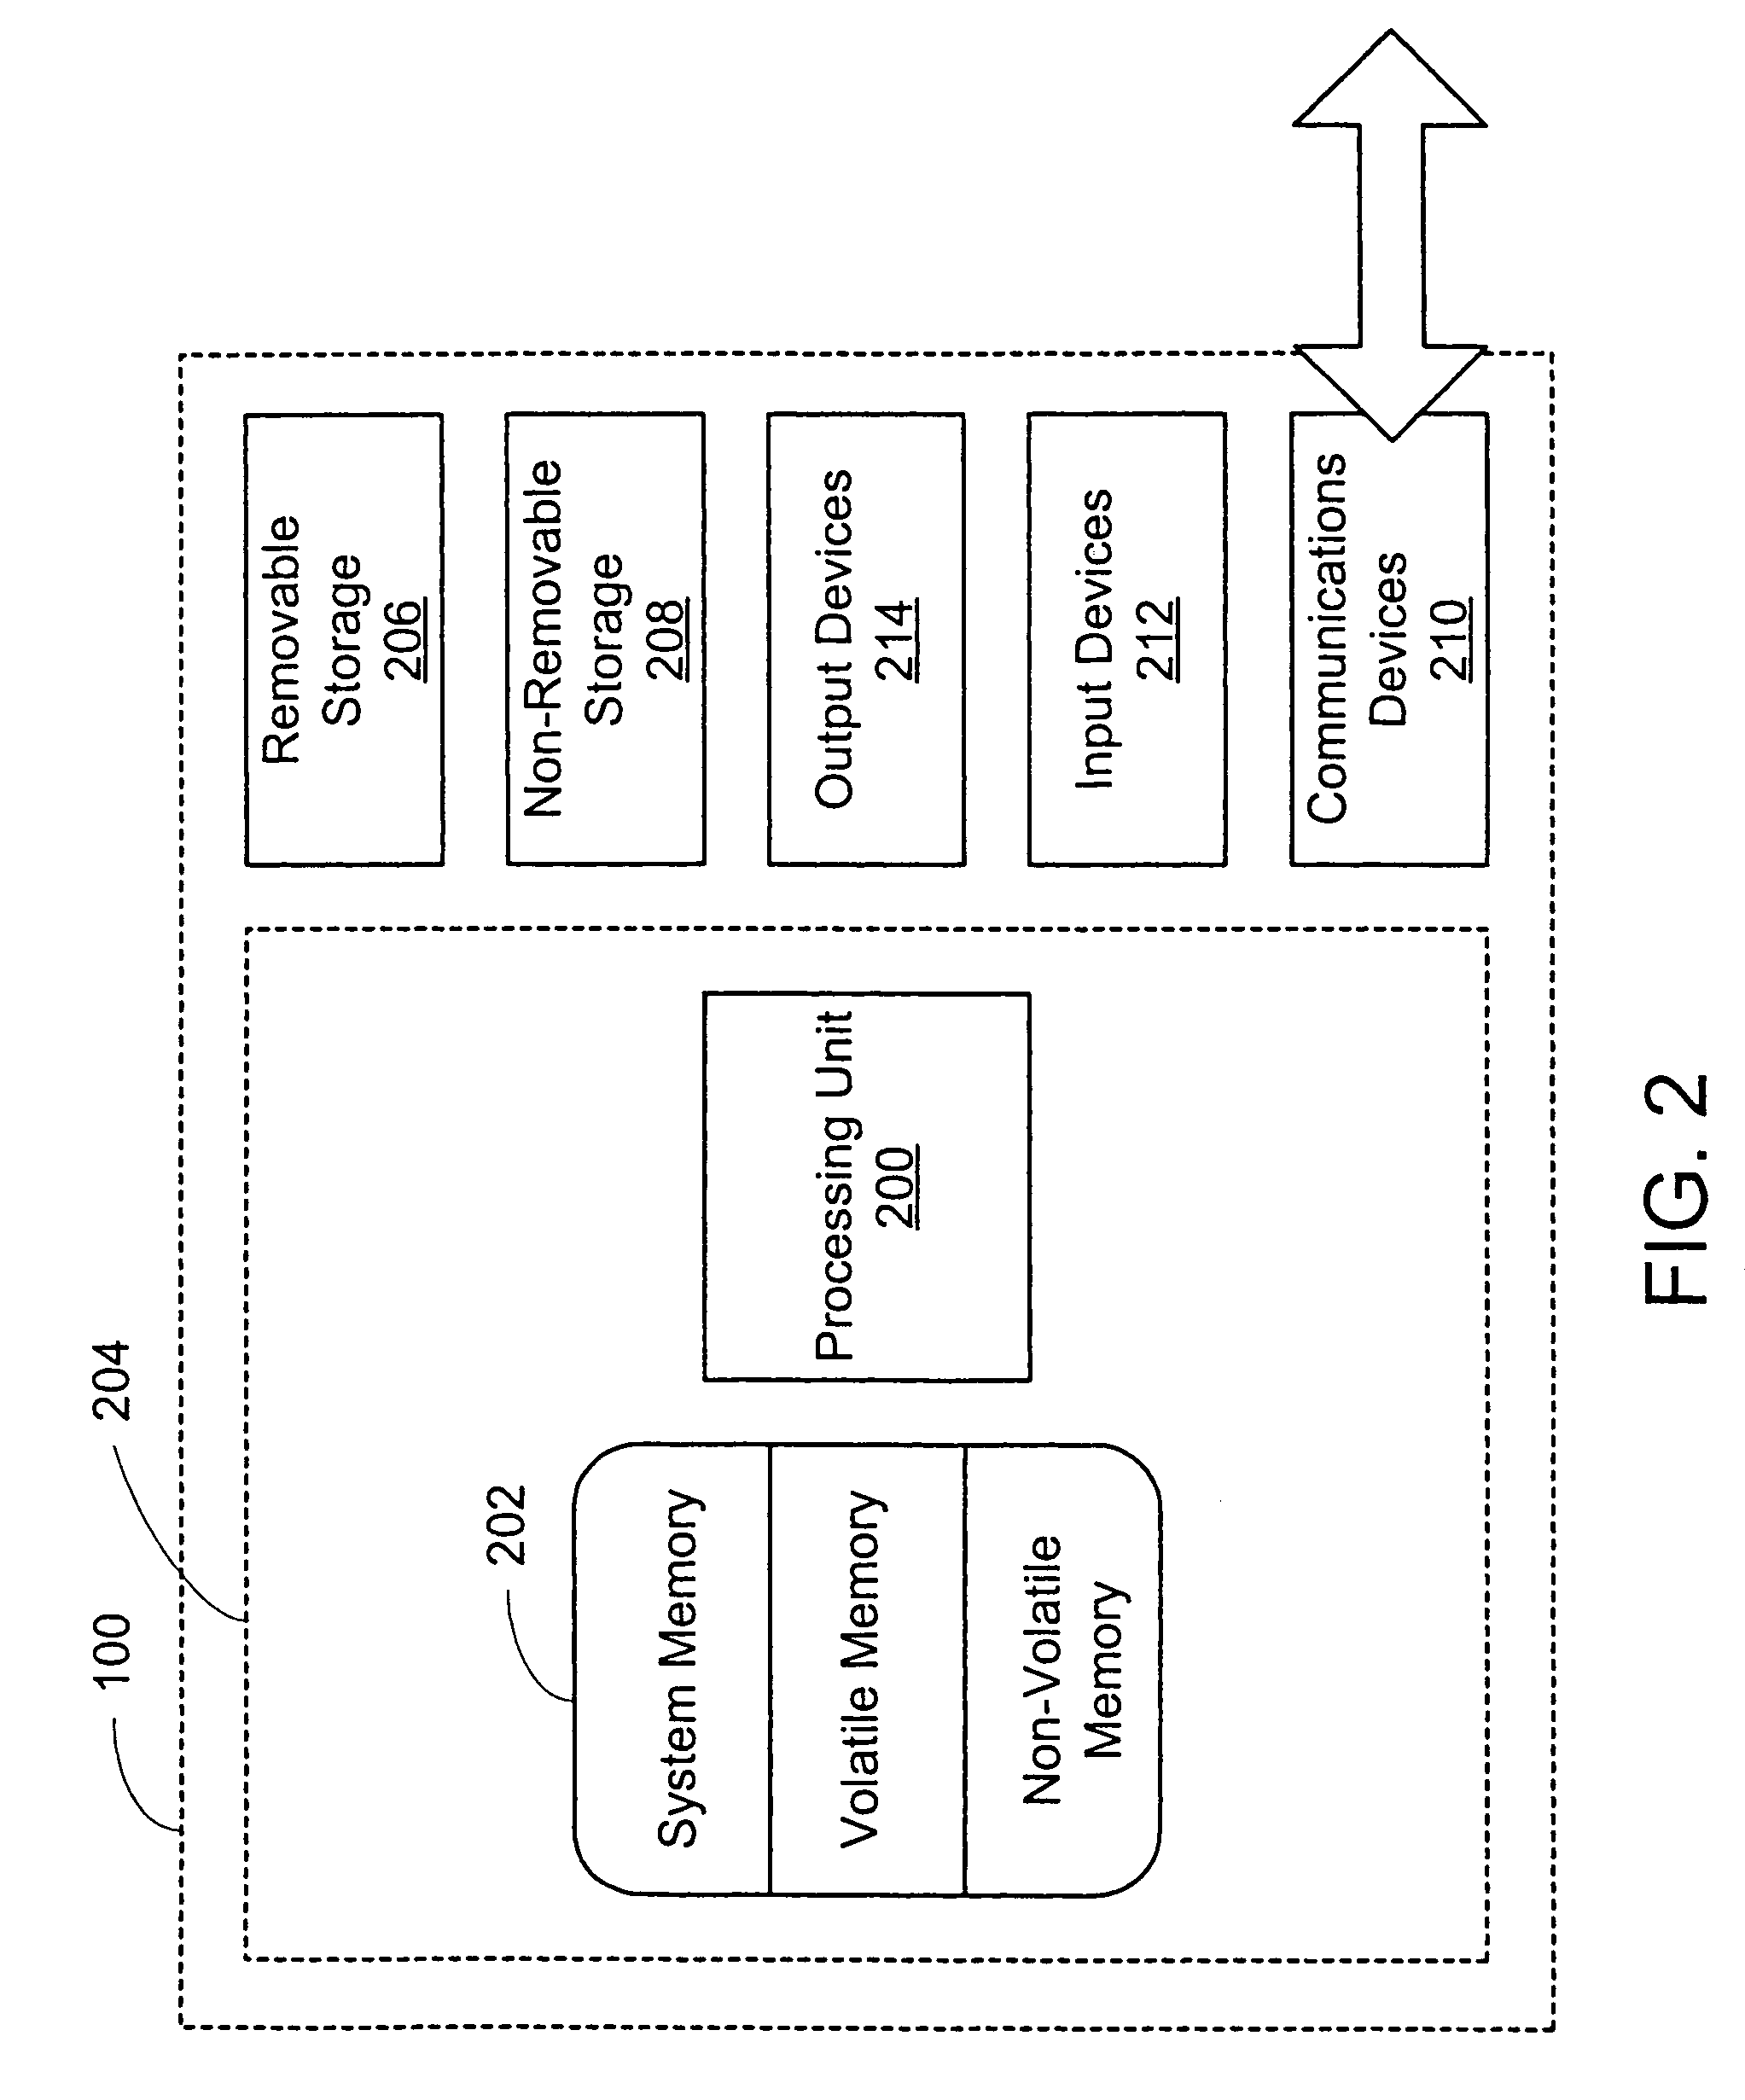 Systems and methods for uniquely identifying networks by correlating each network name with the application programming interfaces of transport protocols supported by the network